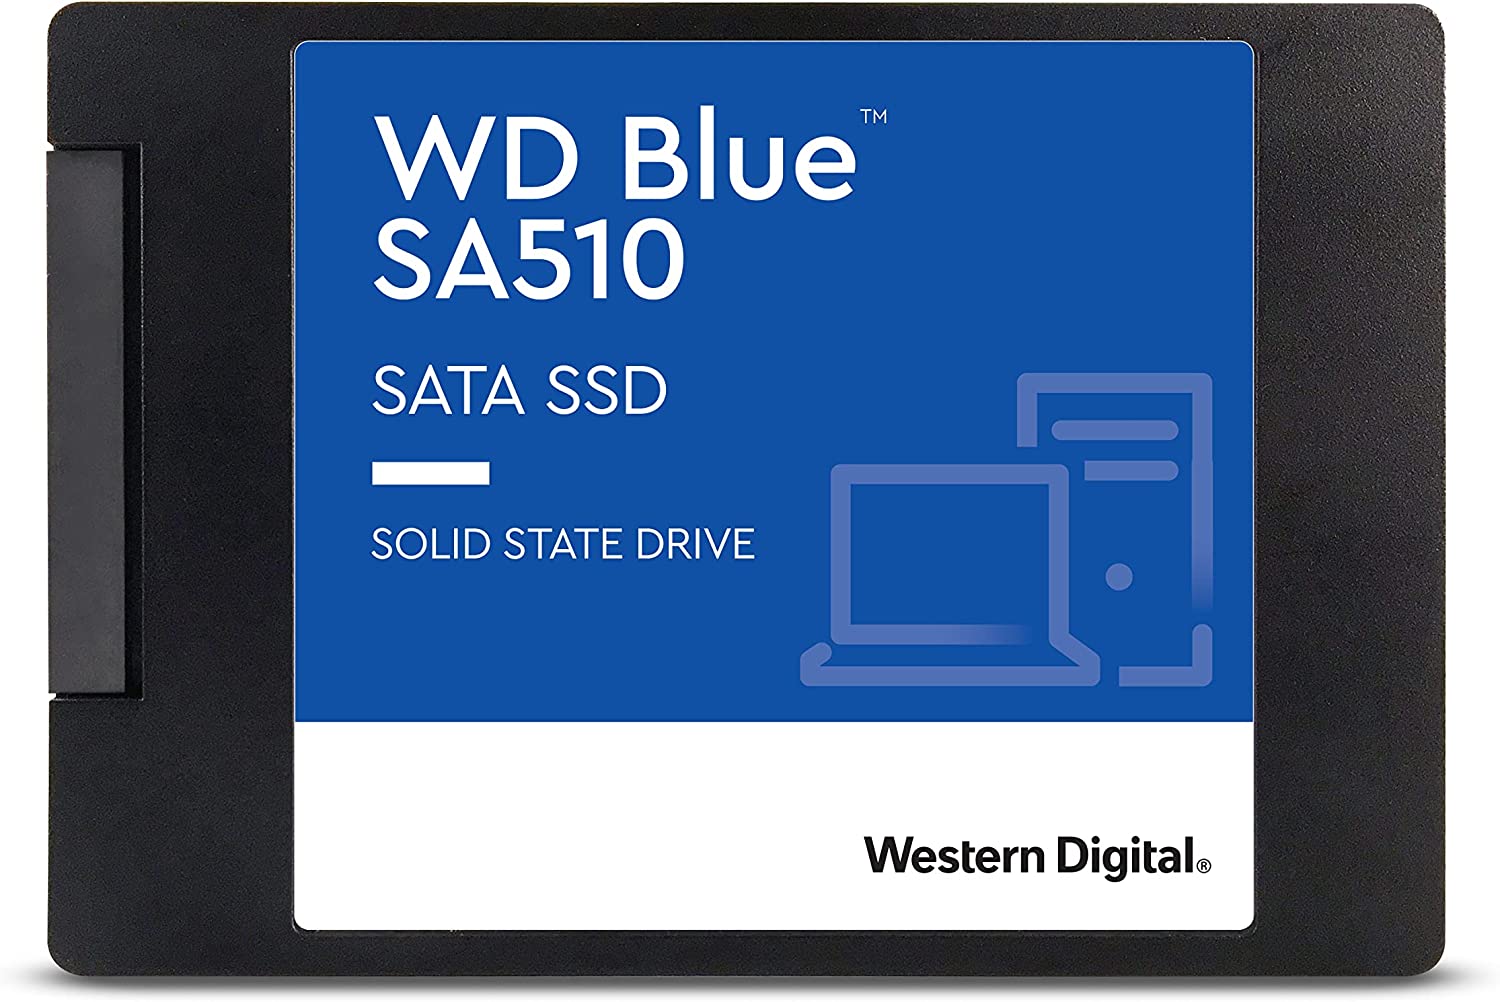 Capacity: 1TB,Style: Newest Generation,Pattern Name: SSD